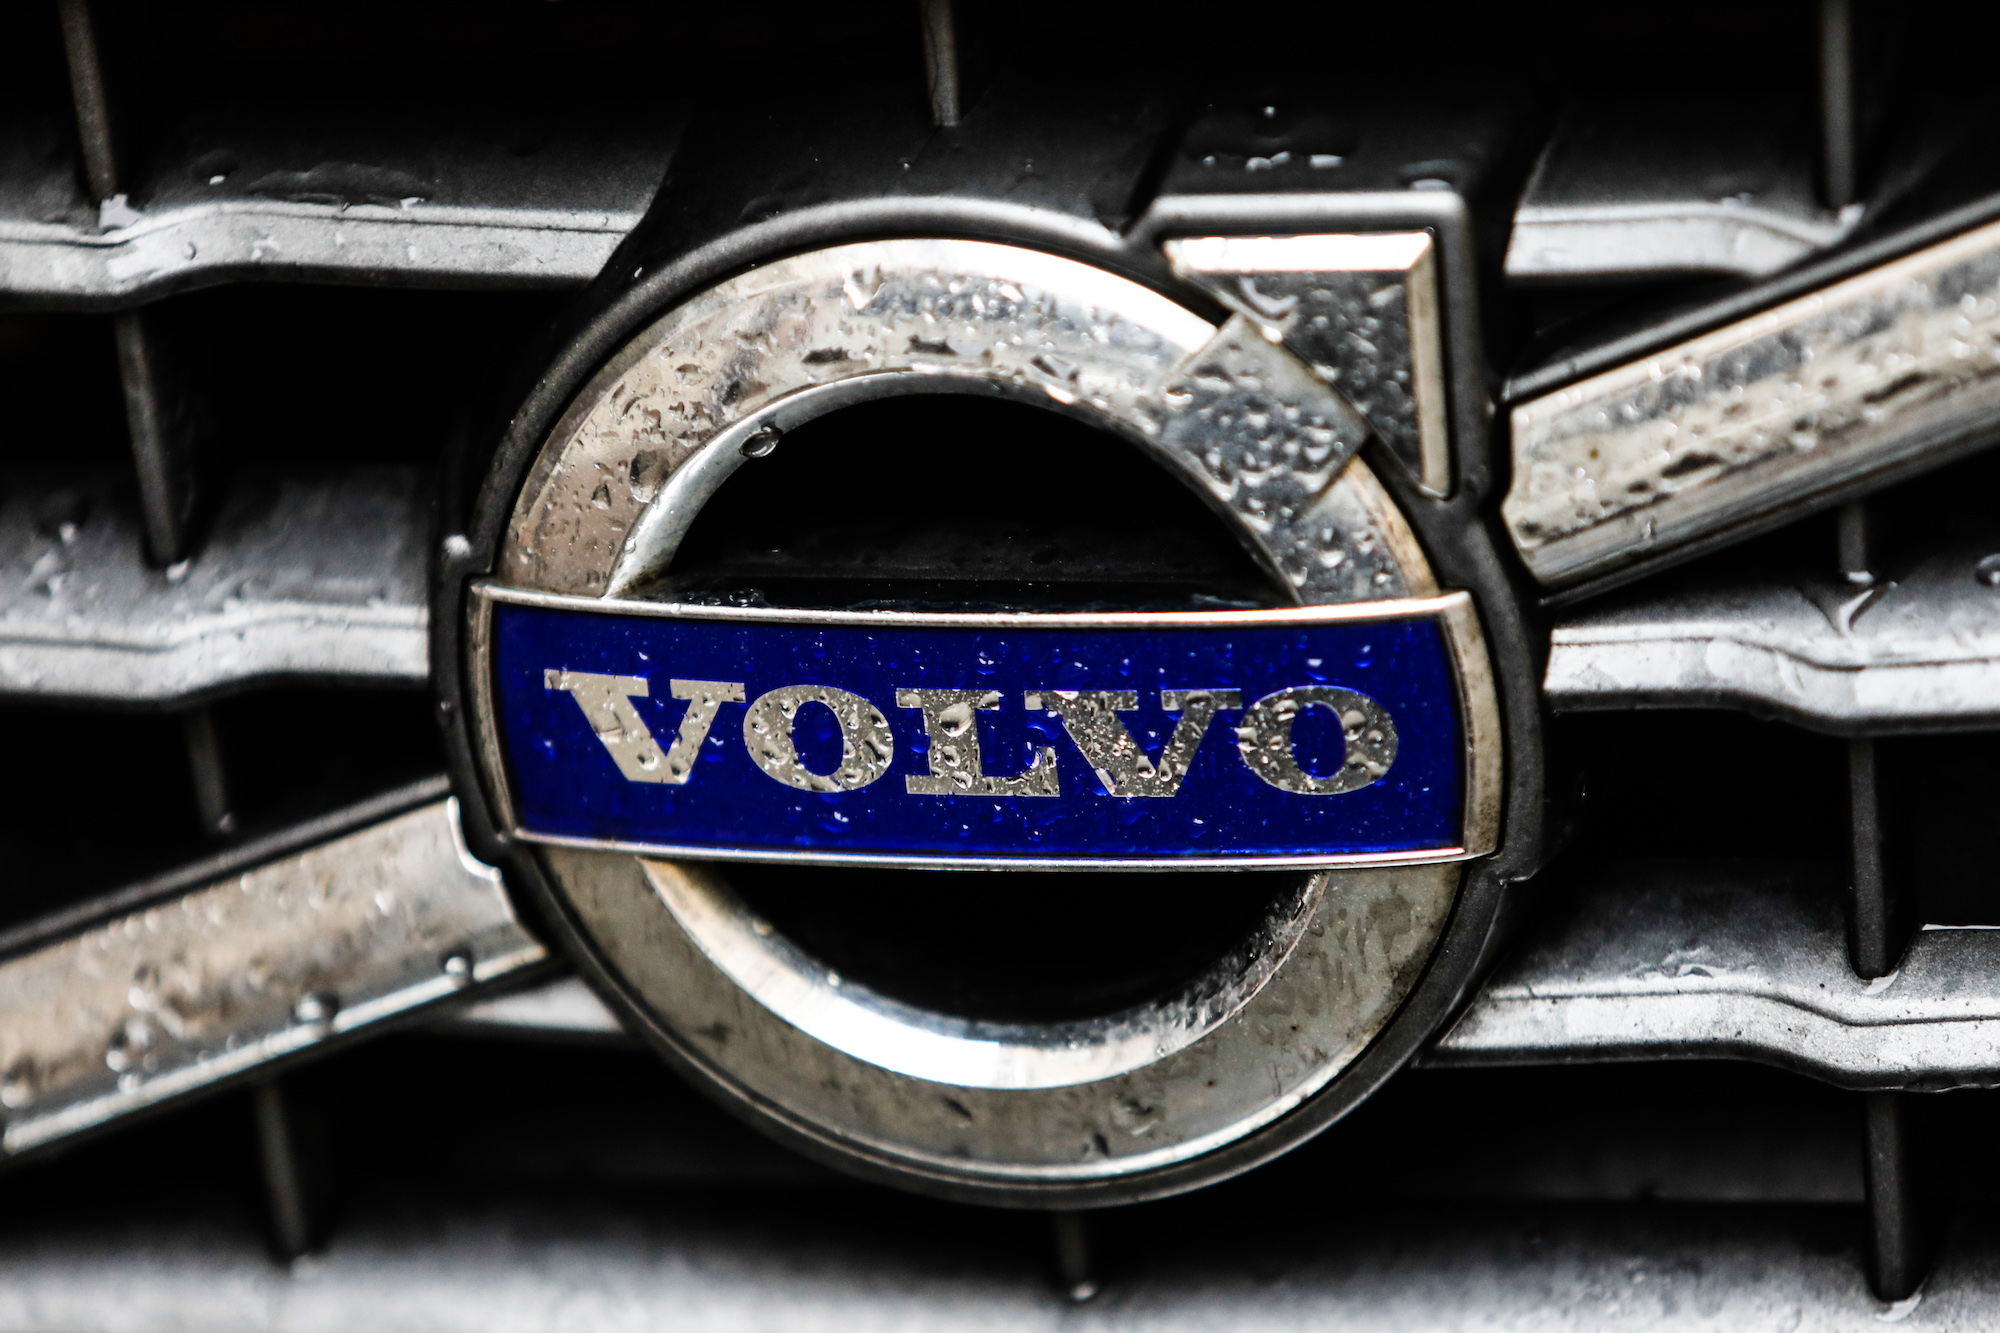 Raindrops on a Volvo logo on a car grille